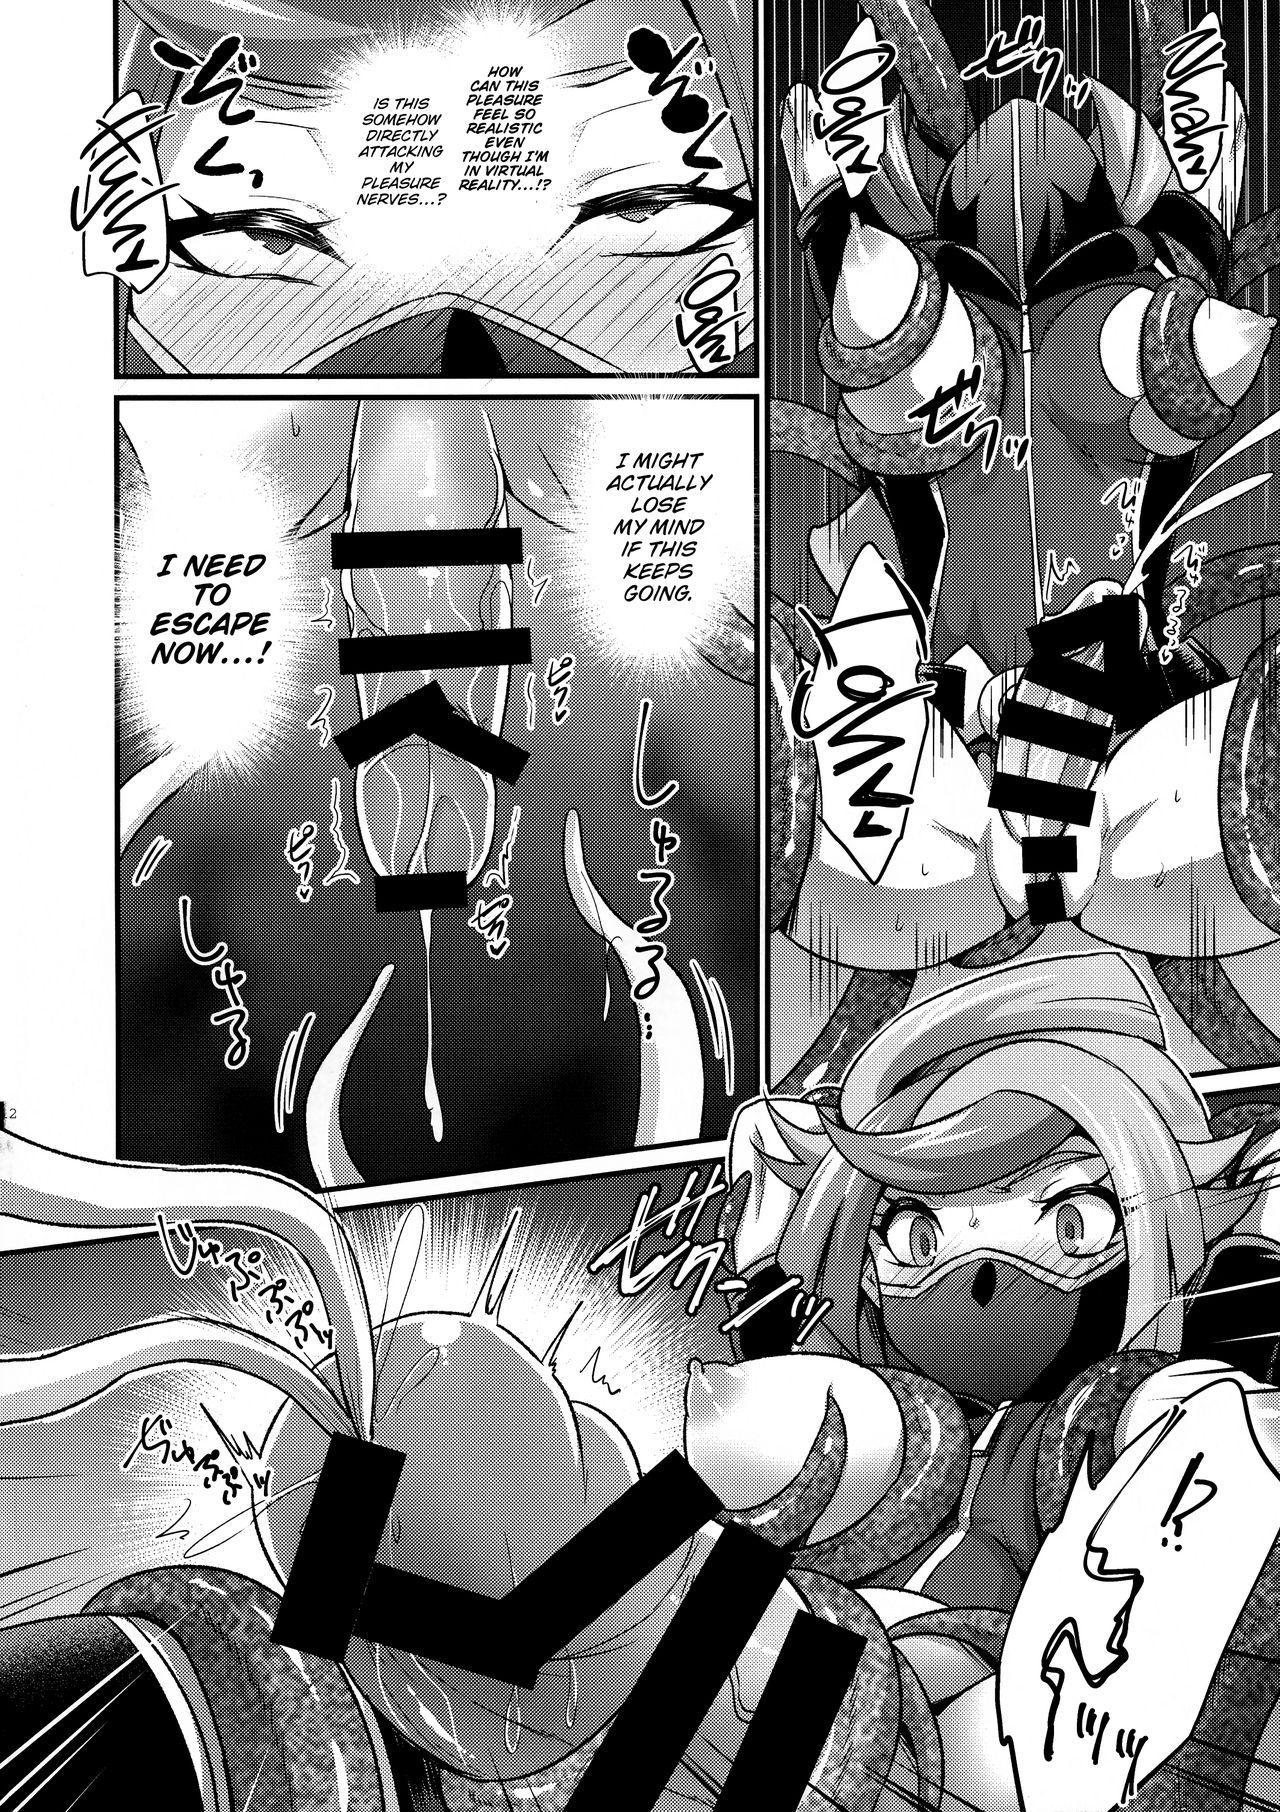 Dress CYBER R AREA - Yu gi oh vrains Gayfuck - Page 10